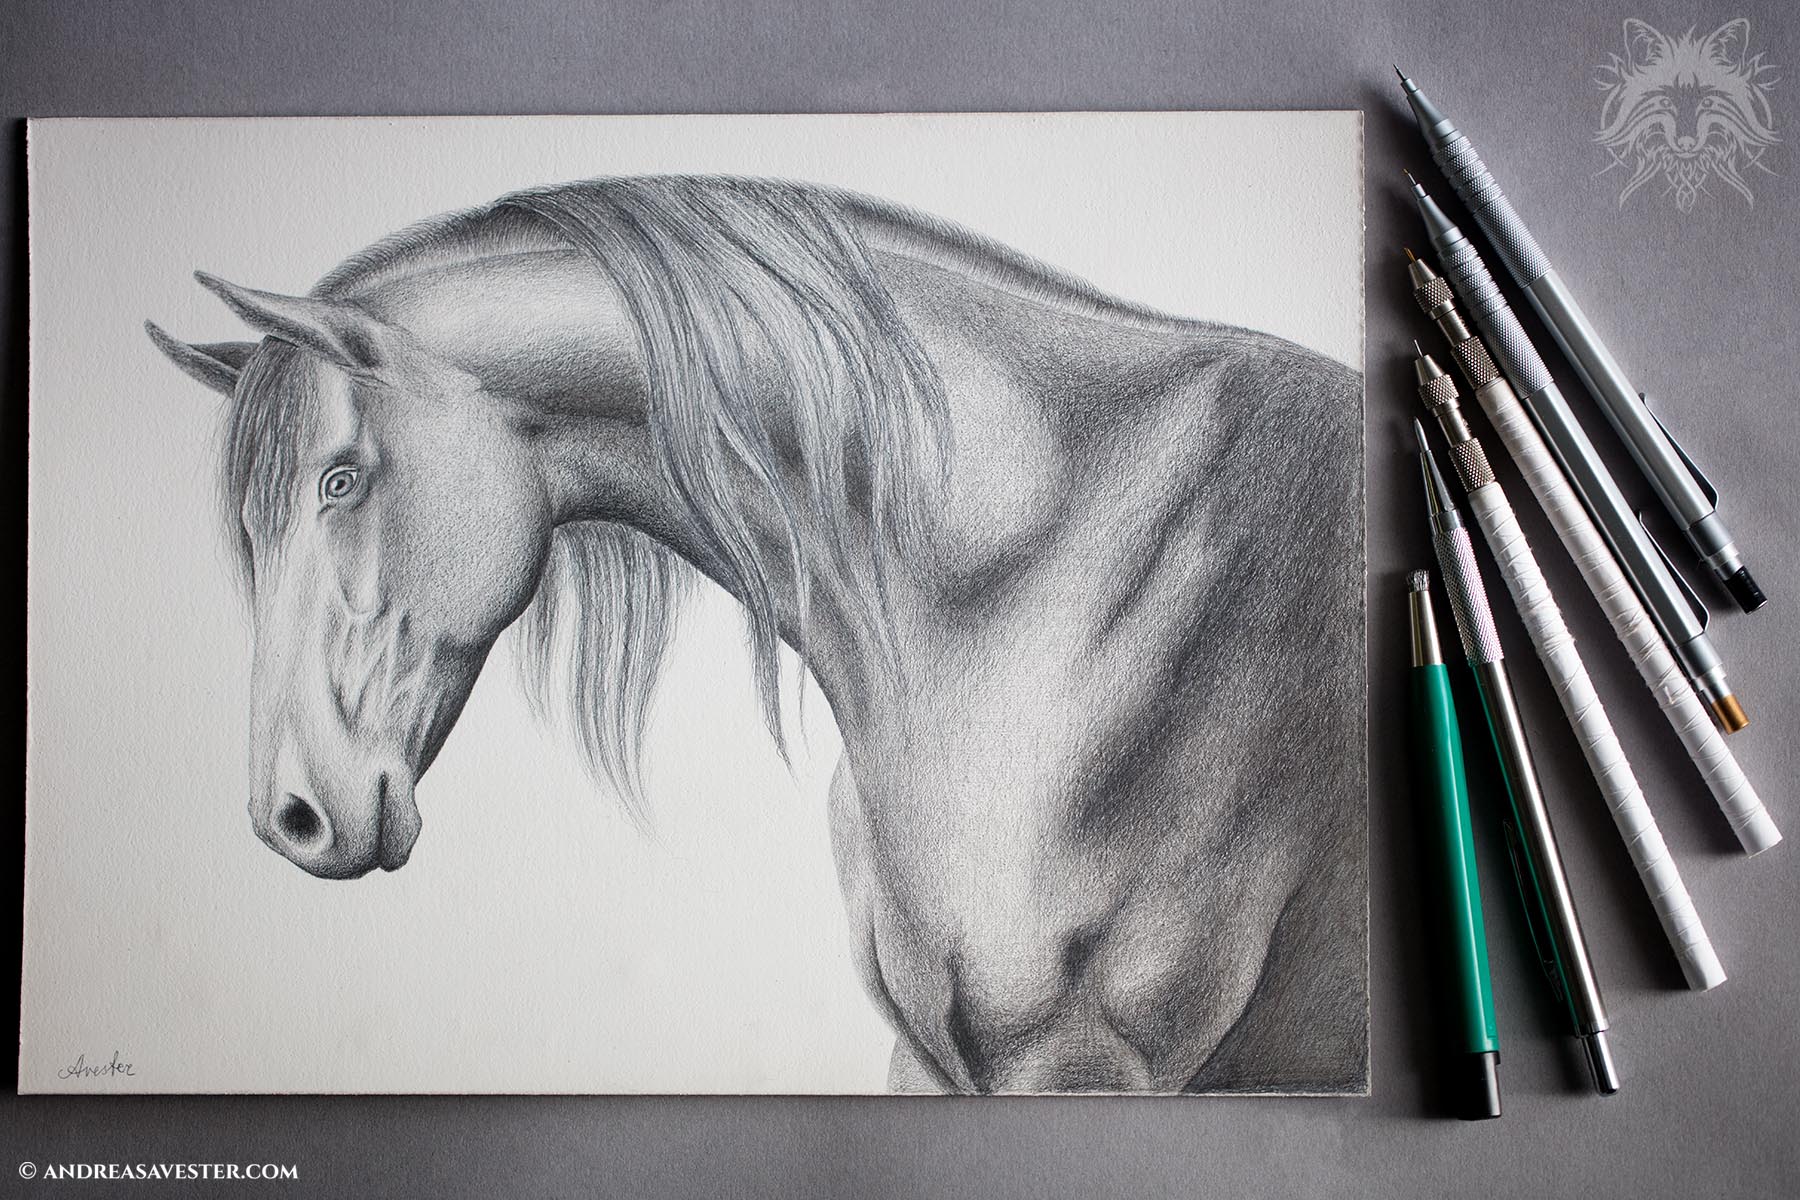 Metalpoint drawing of a horse head.